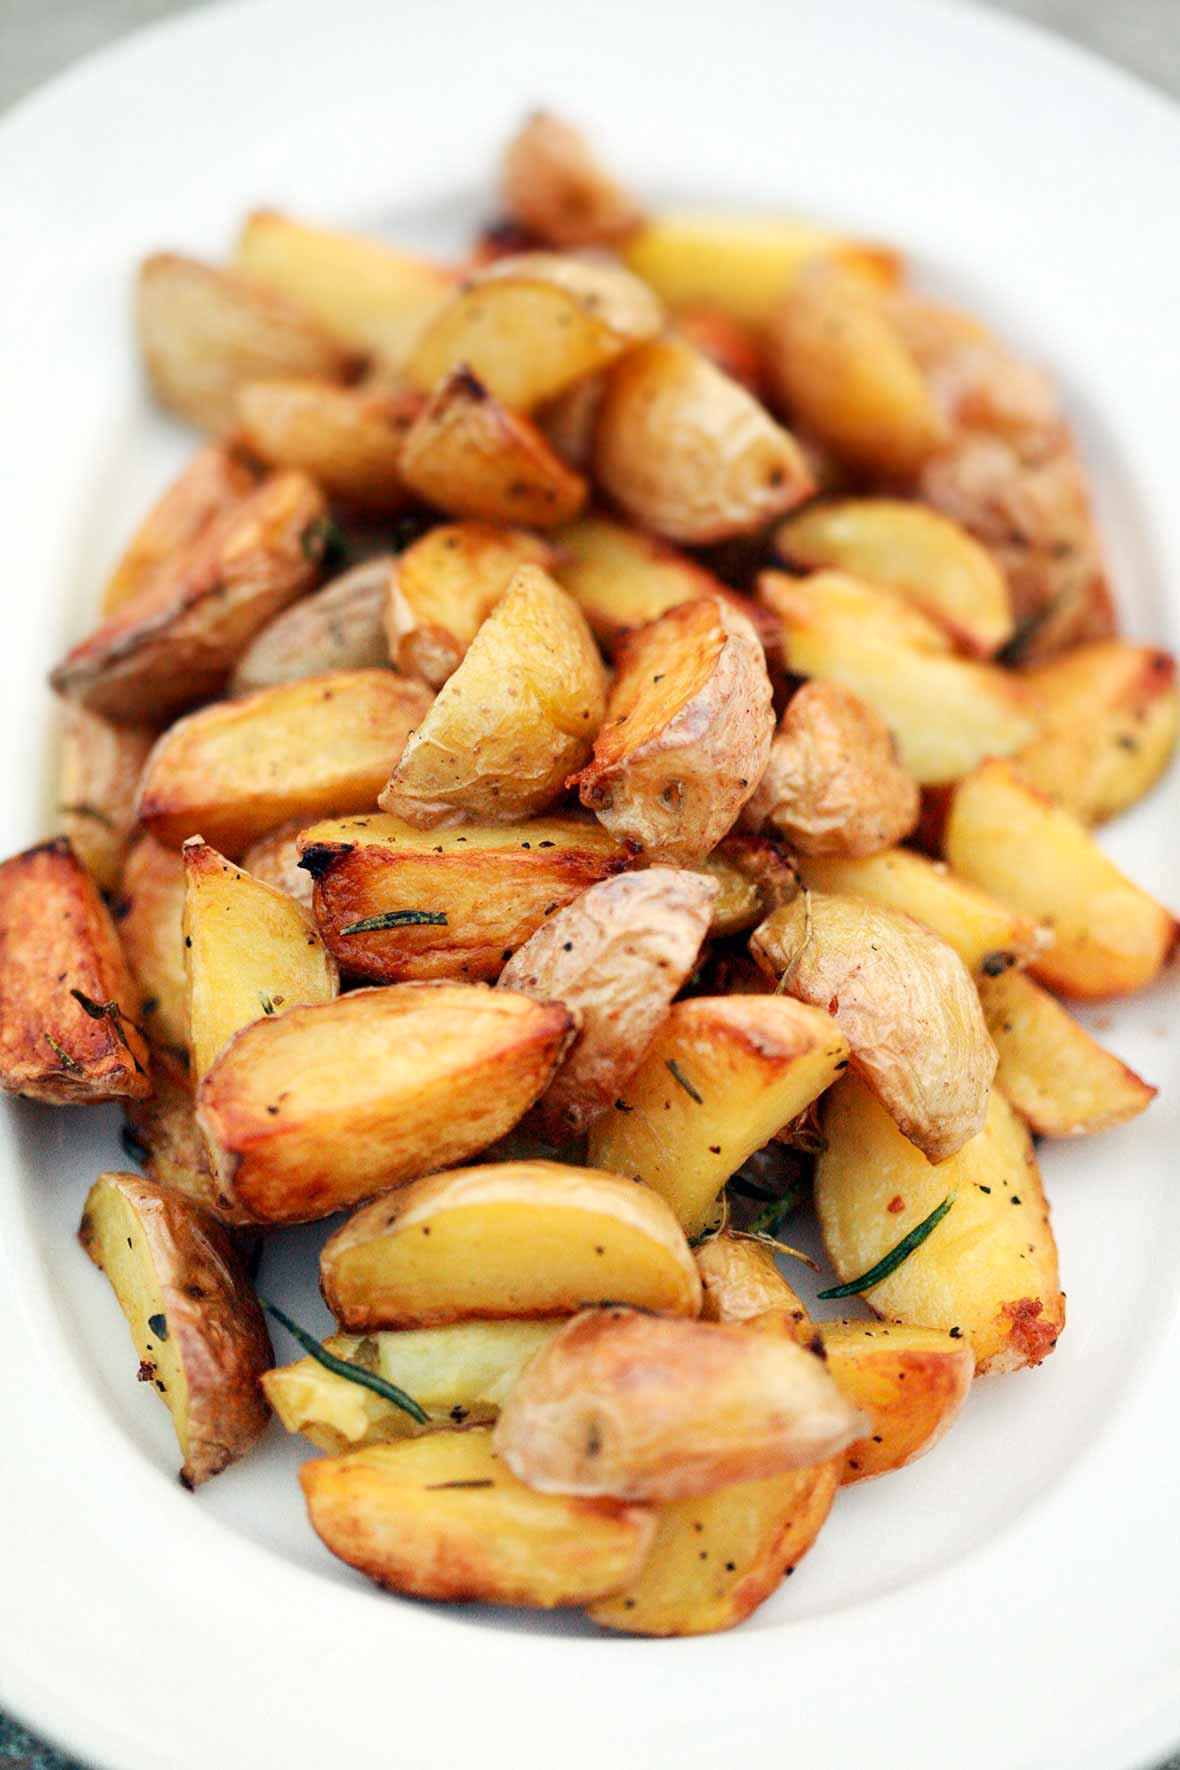 Roasted Potatoes On Grill Awesome Roasted Potatoes On the Grill Recipe